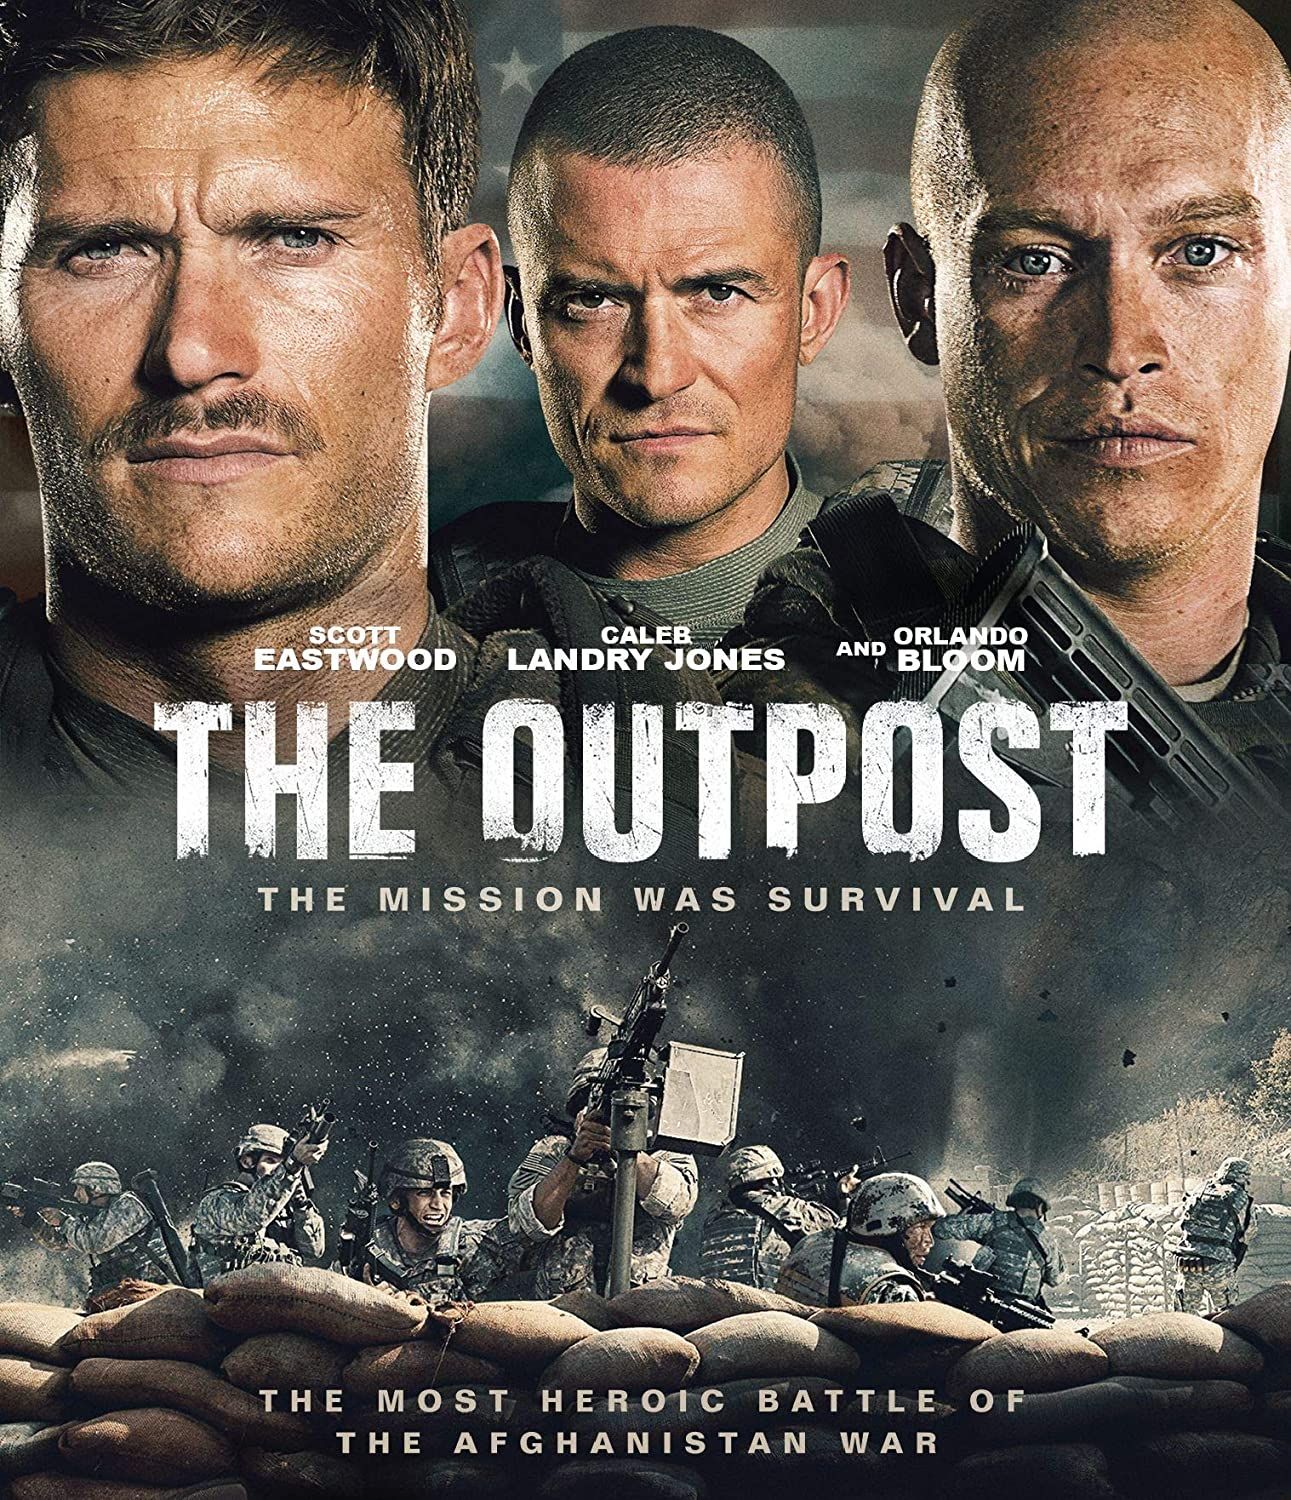 Download The Outpost (2018) BluRay Dual Audio Hindi ORG 1080p | 720p | 480p [450MB] download